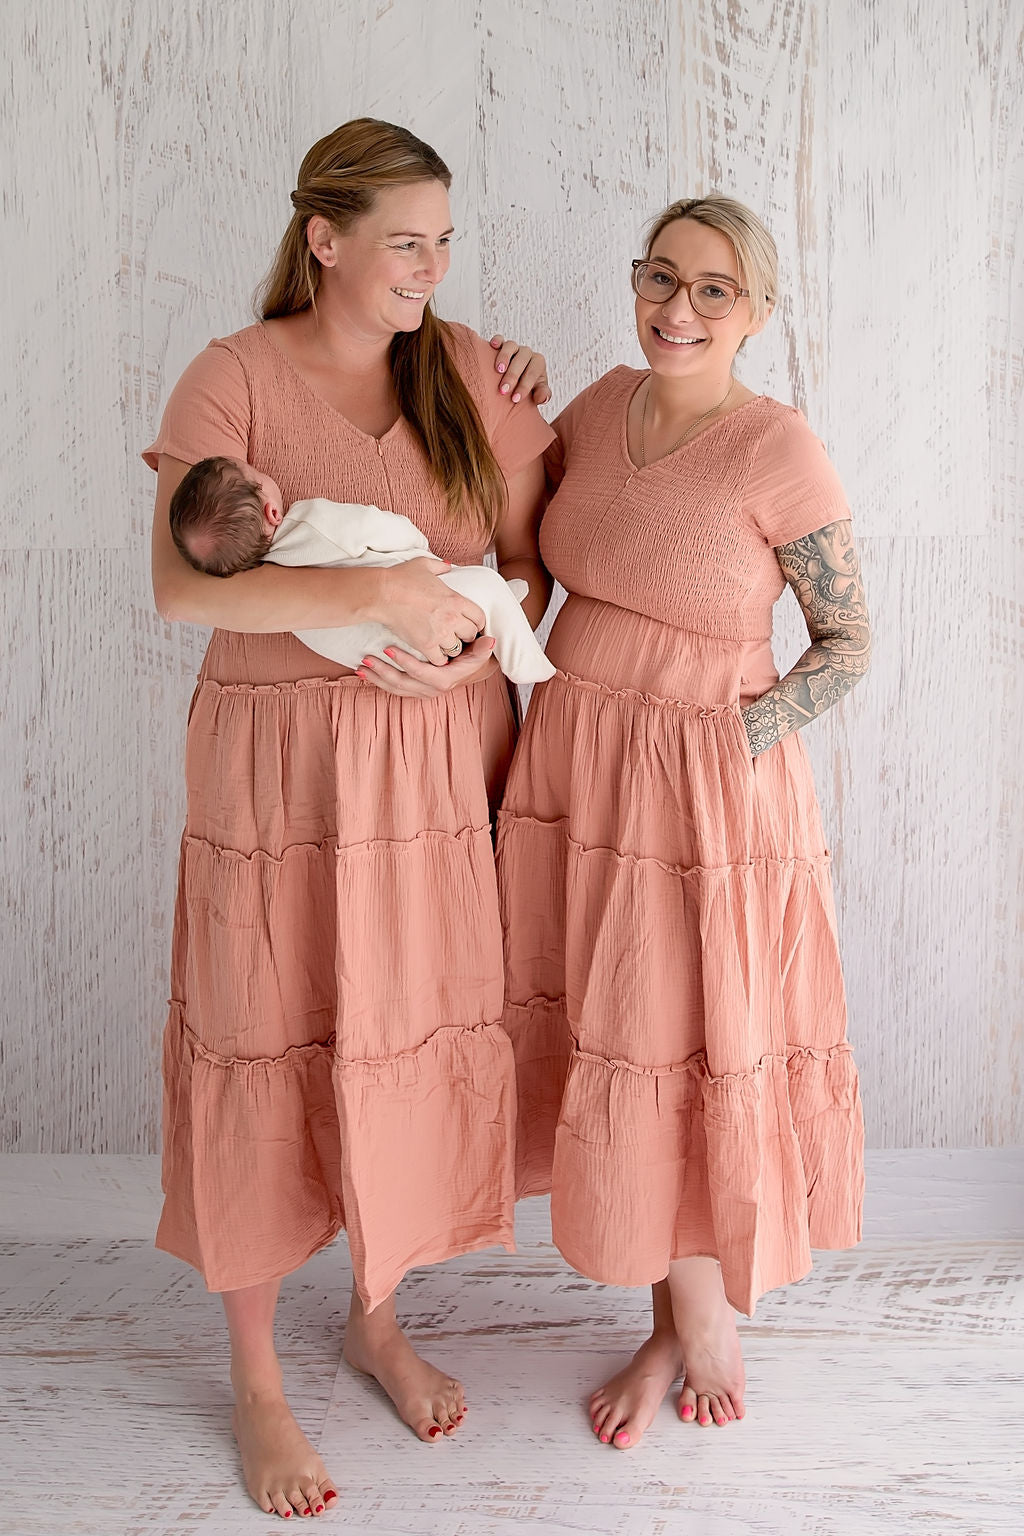 Flourish Maternity NZ - online mum and baby shop. Bella tiered dusty pink dress - pregnancy, breastfeeding & beyond flowing dress with pockets.